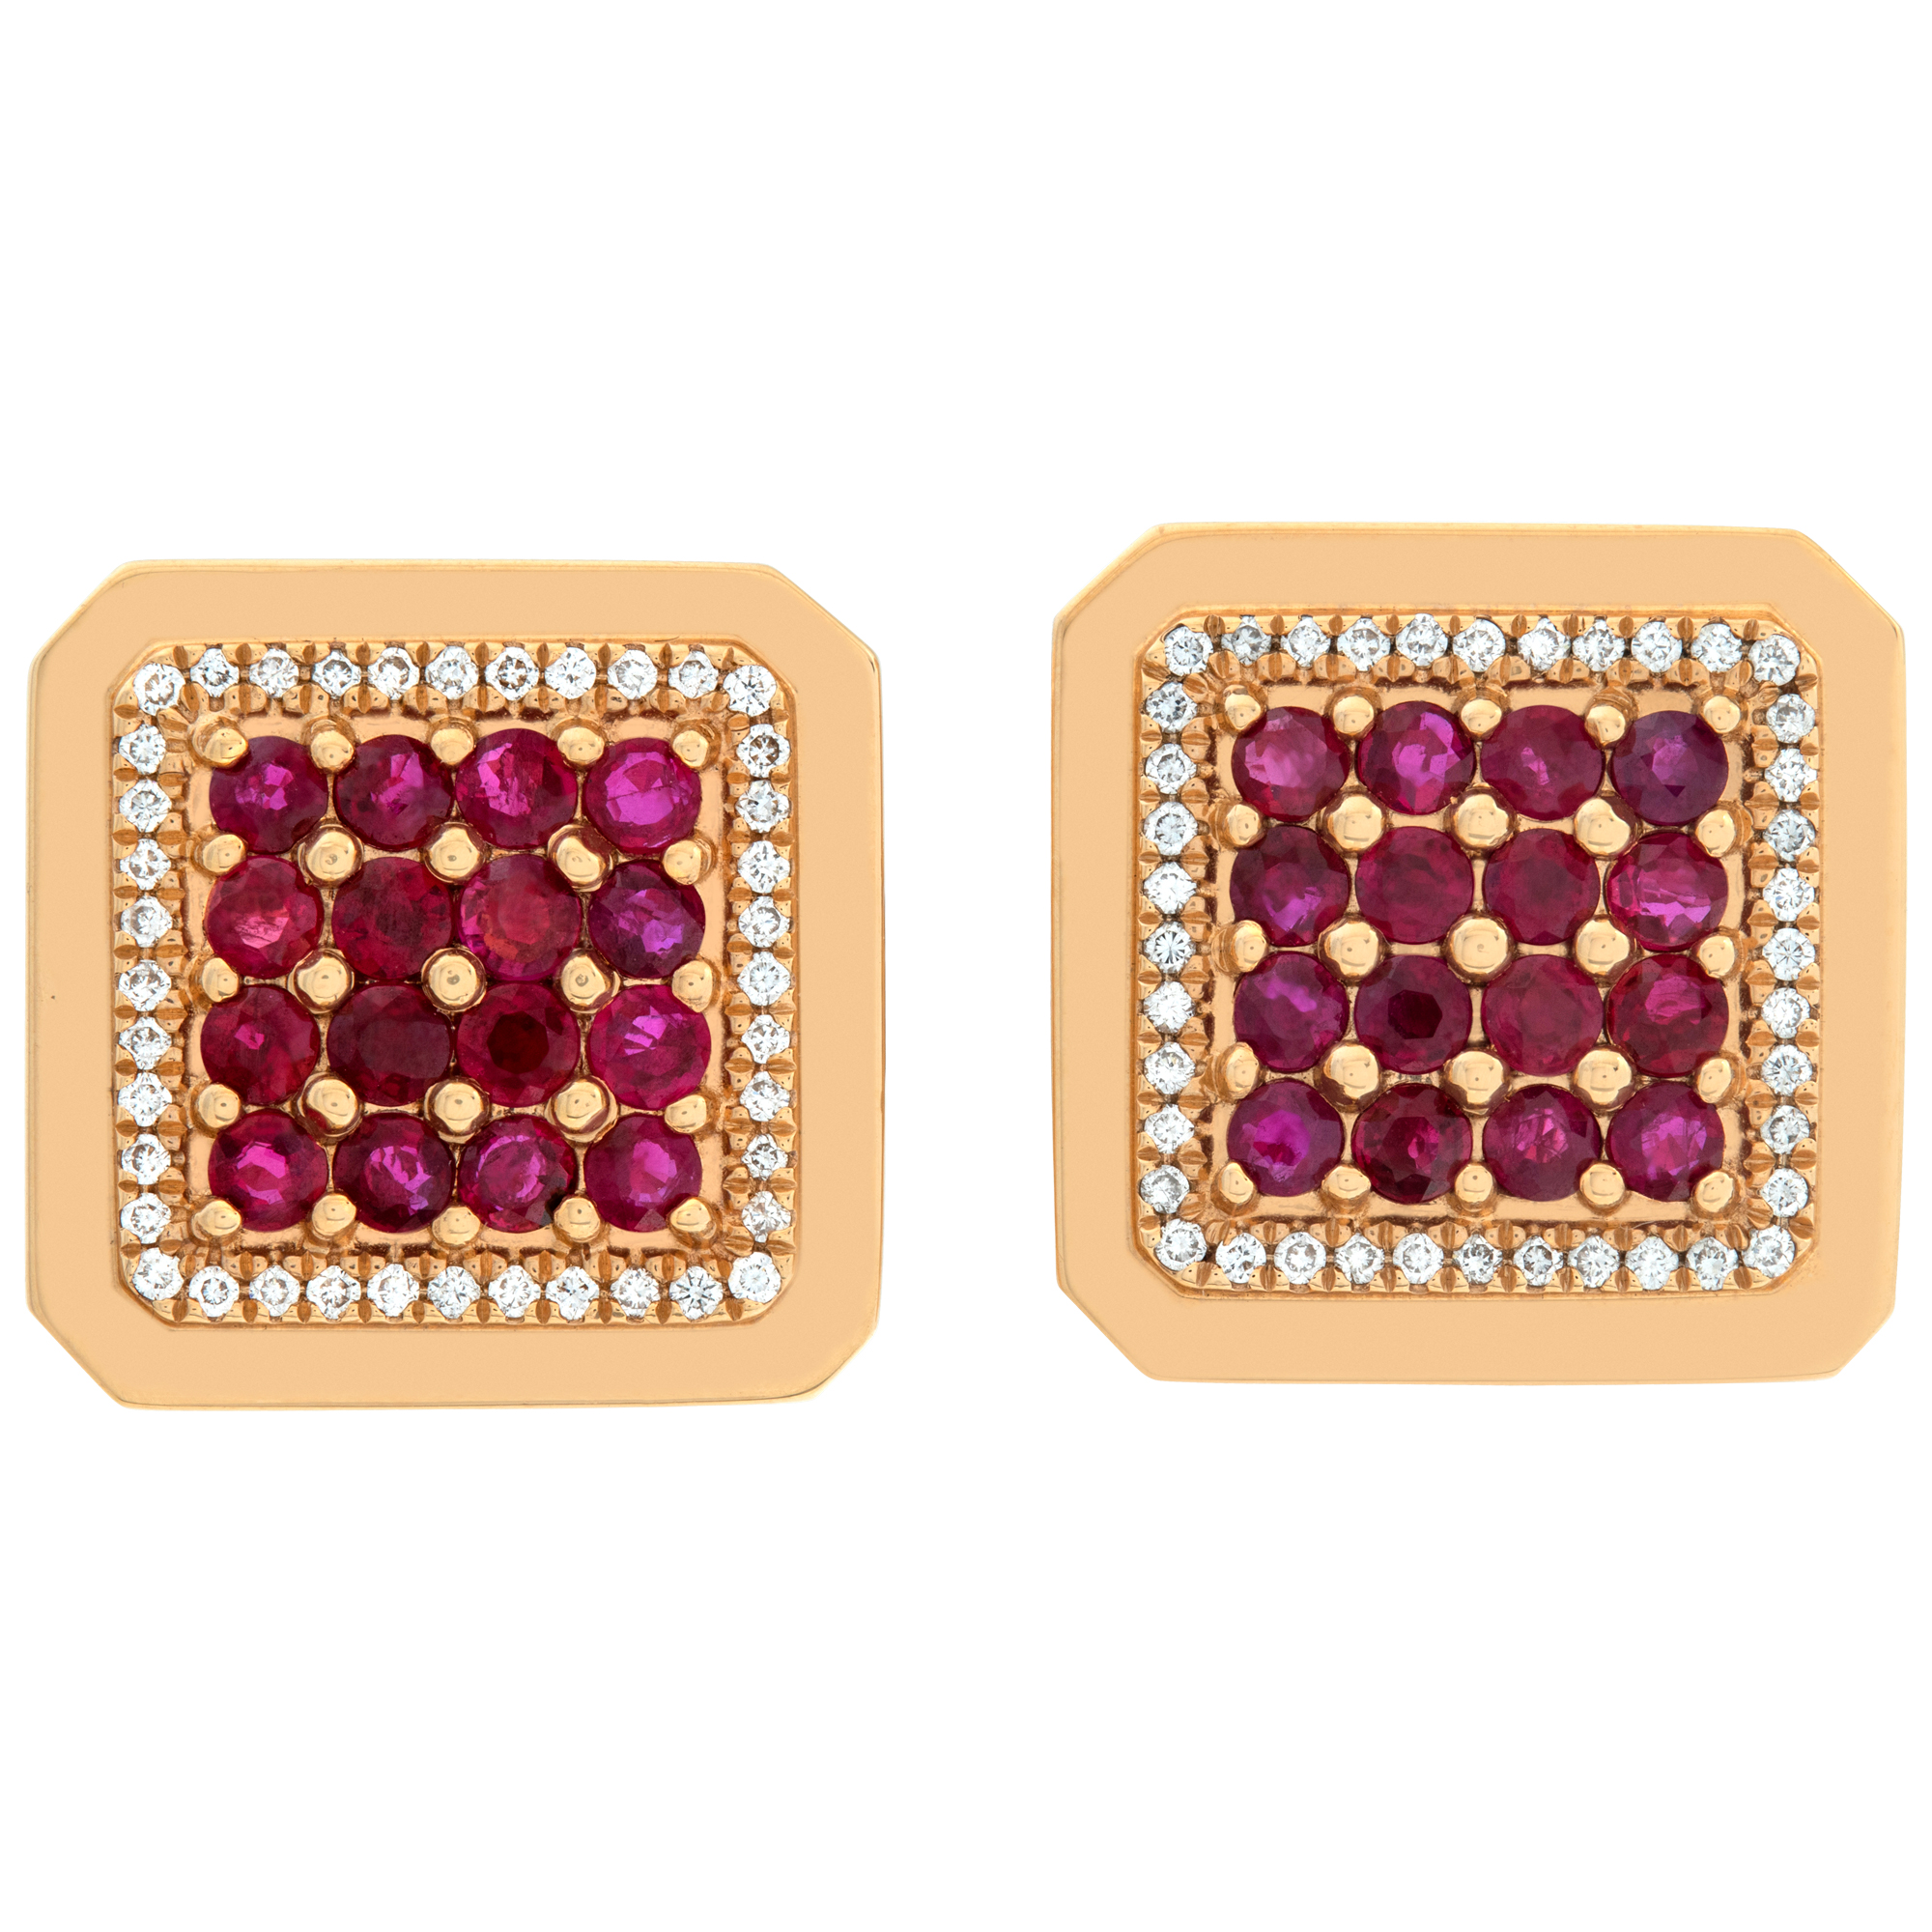 Ruby & diamonds square cufflinks, set in 18k yellow gold. Total round cut ruby approx. weight: 3.20 carats. image 1